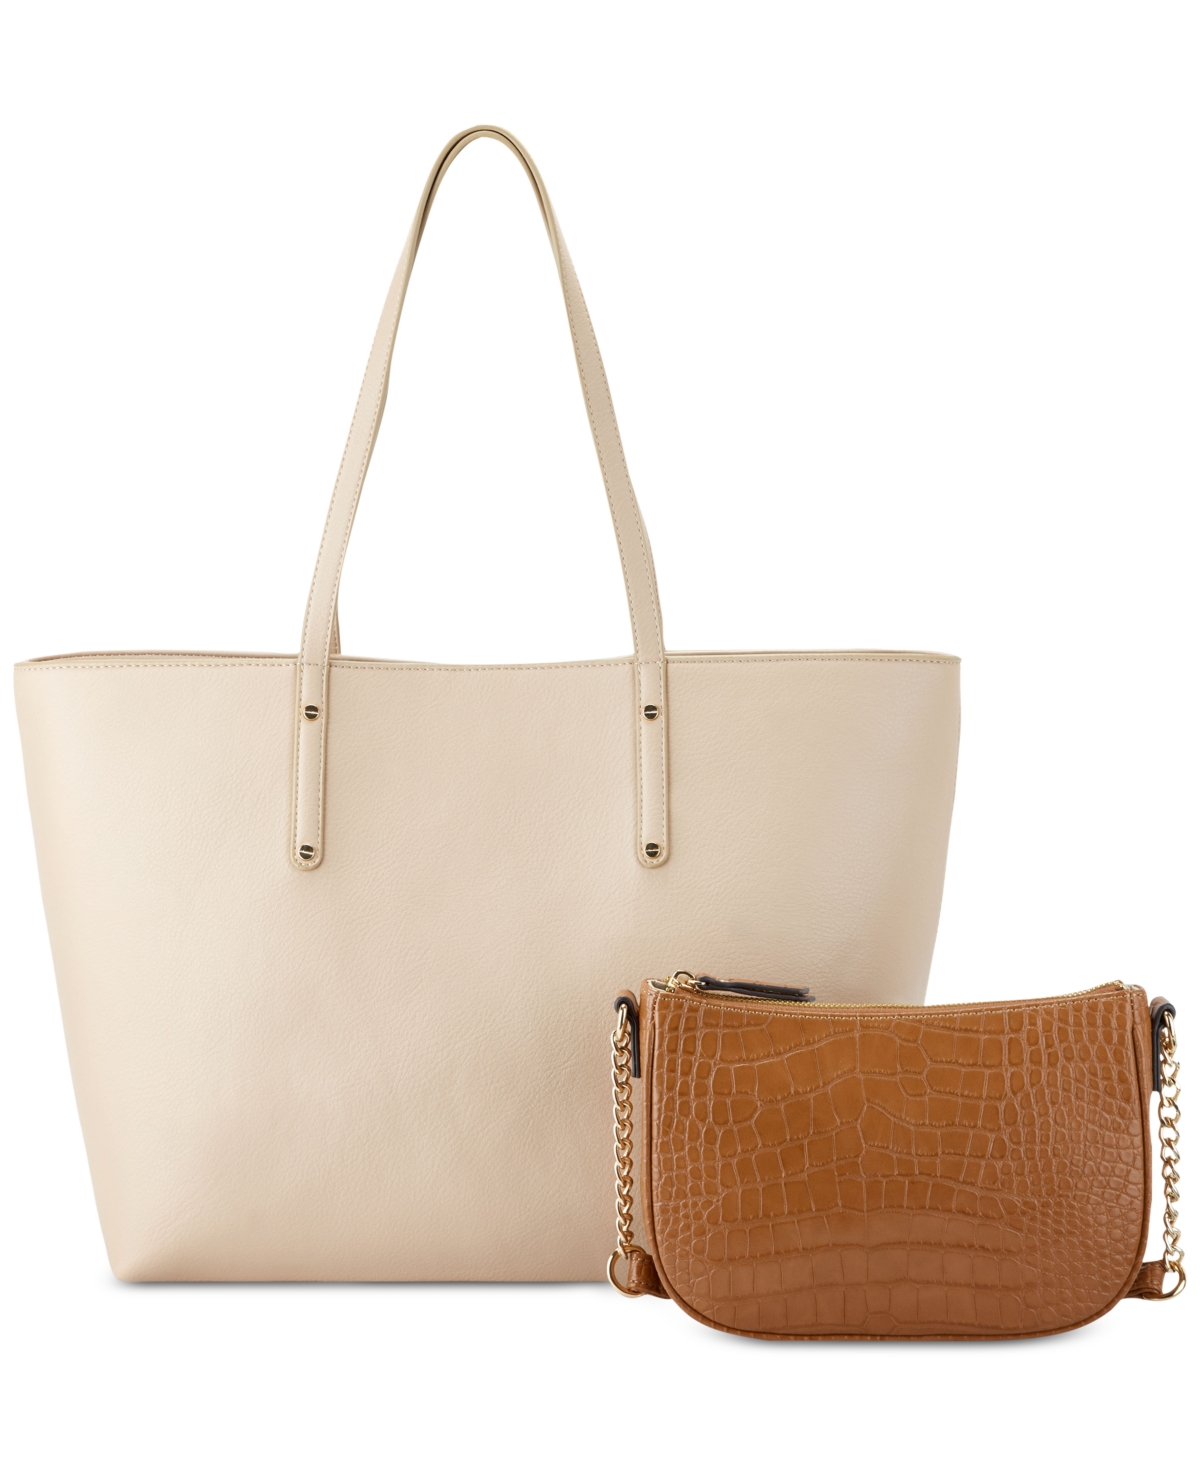 Inc International Concepts Zoiey 2-1 Tote, Created For Macy's In Corn/cathay Croc